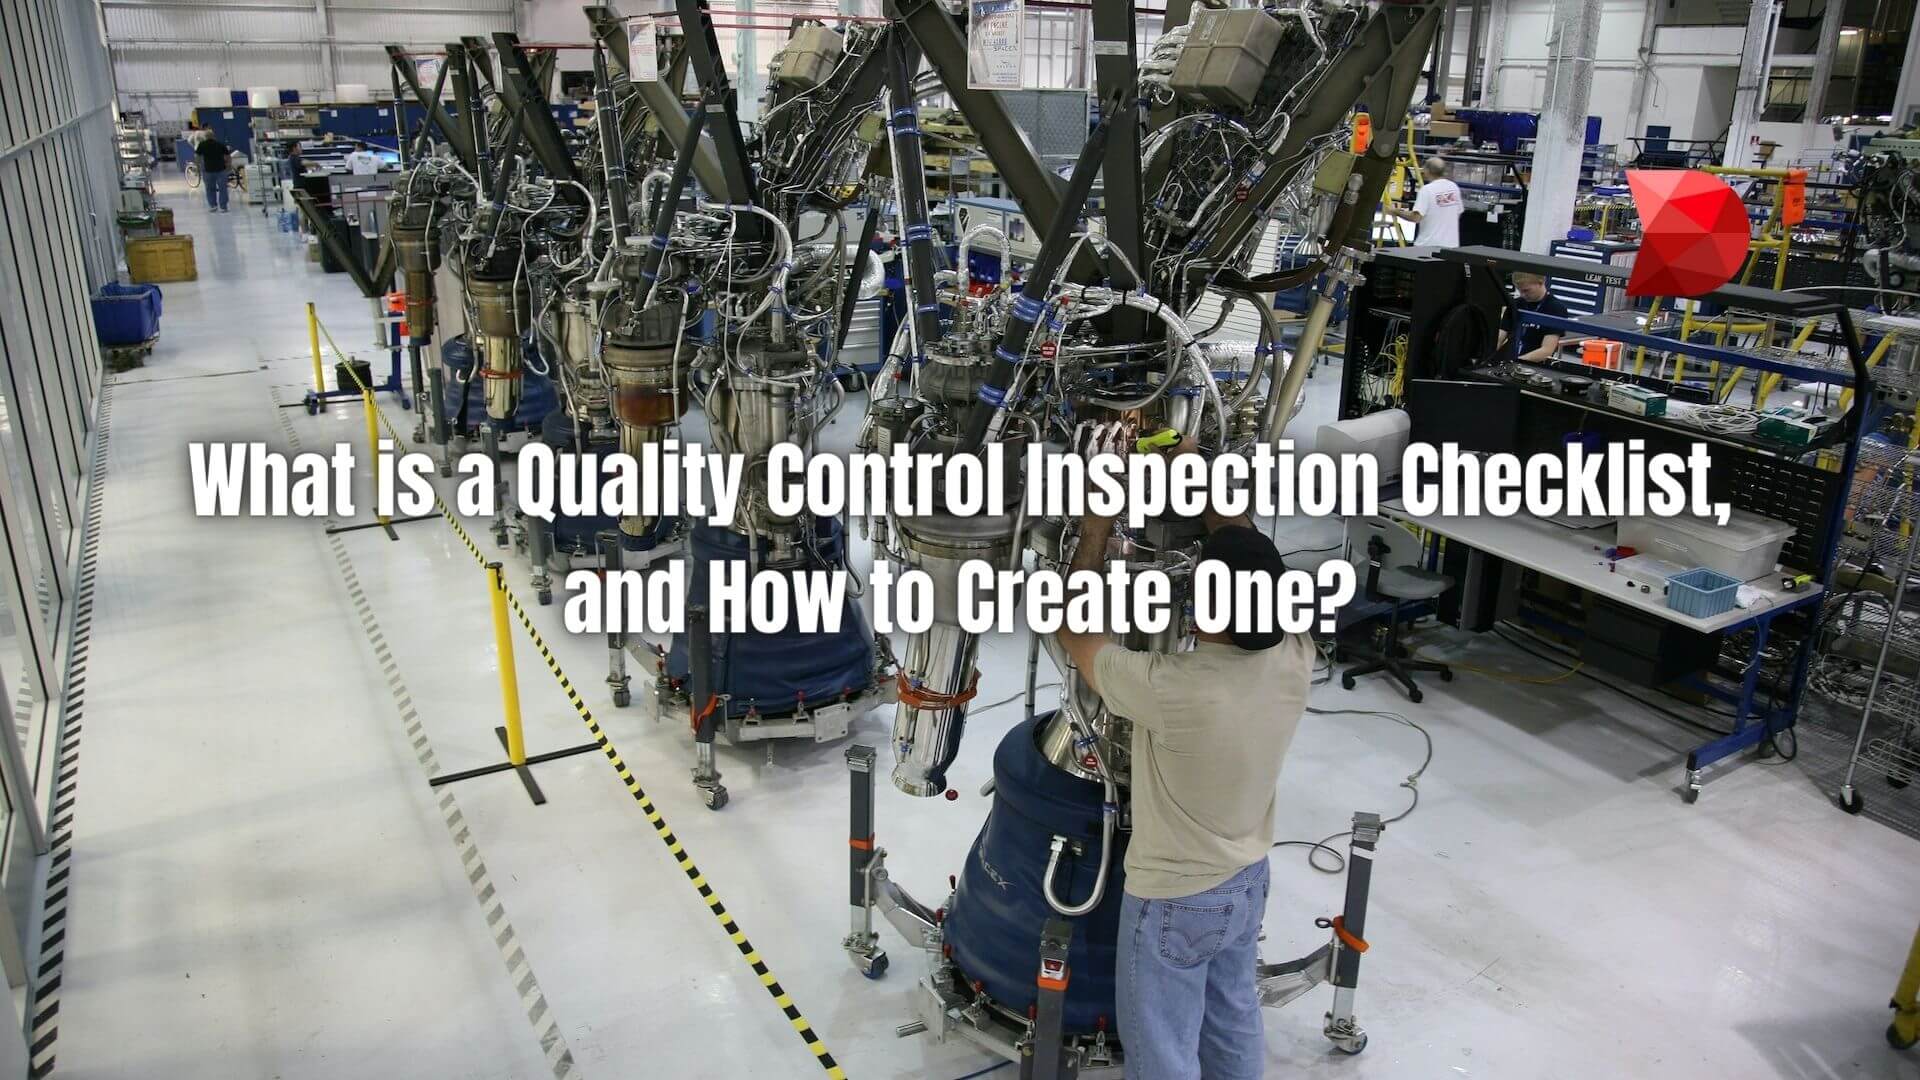 We will talk about what a quality control inspection checklist template is all about and why you should use one. Read here to learn more!